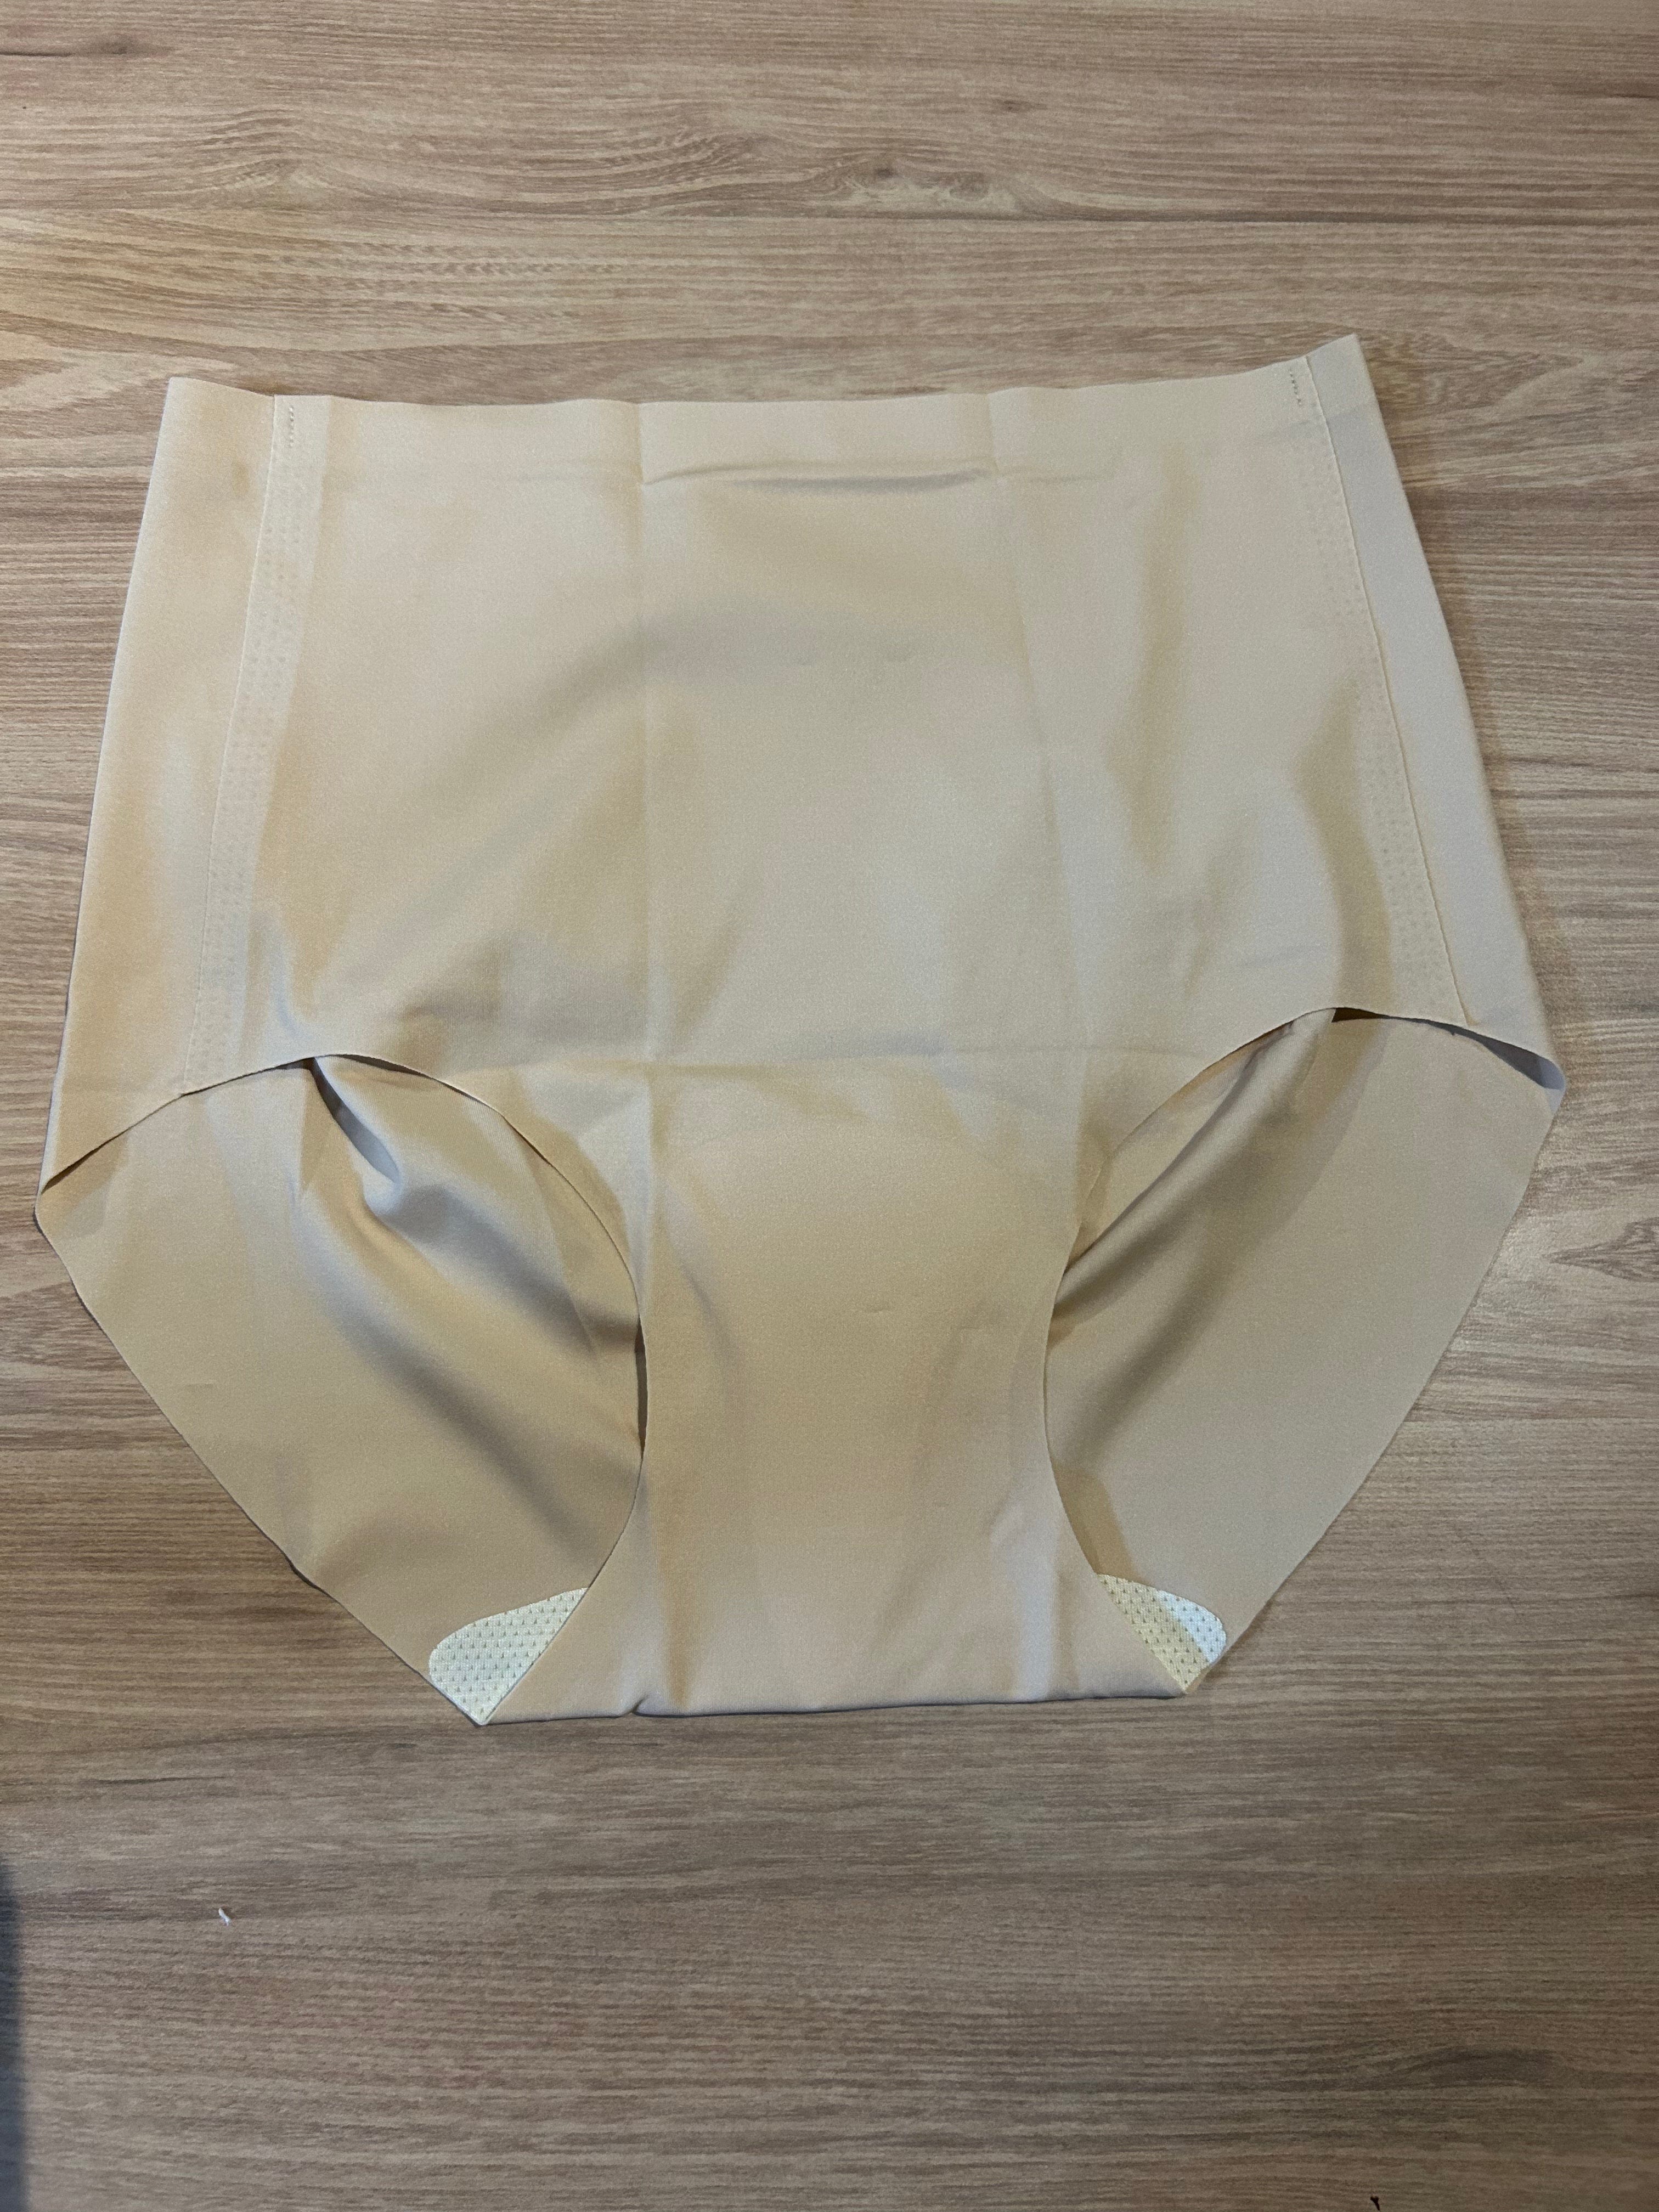 Jemaime first anti camel toe panties Personally I am not affected by camel  toe but I do have some customers who do. This is my first bo